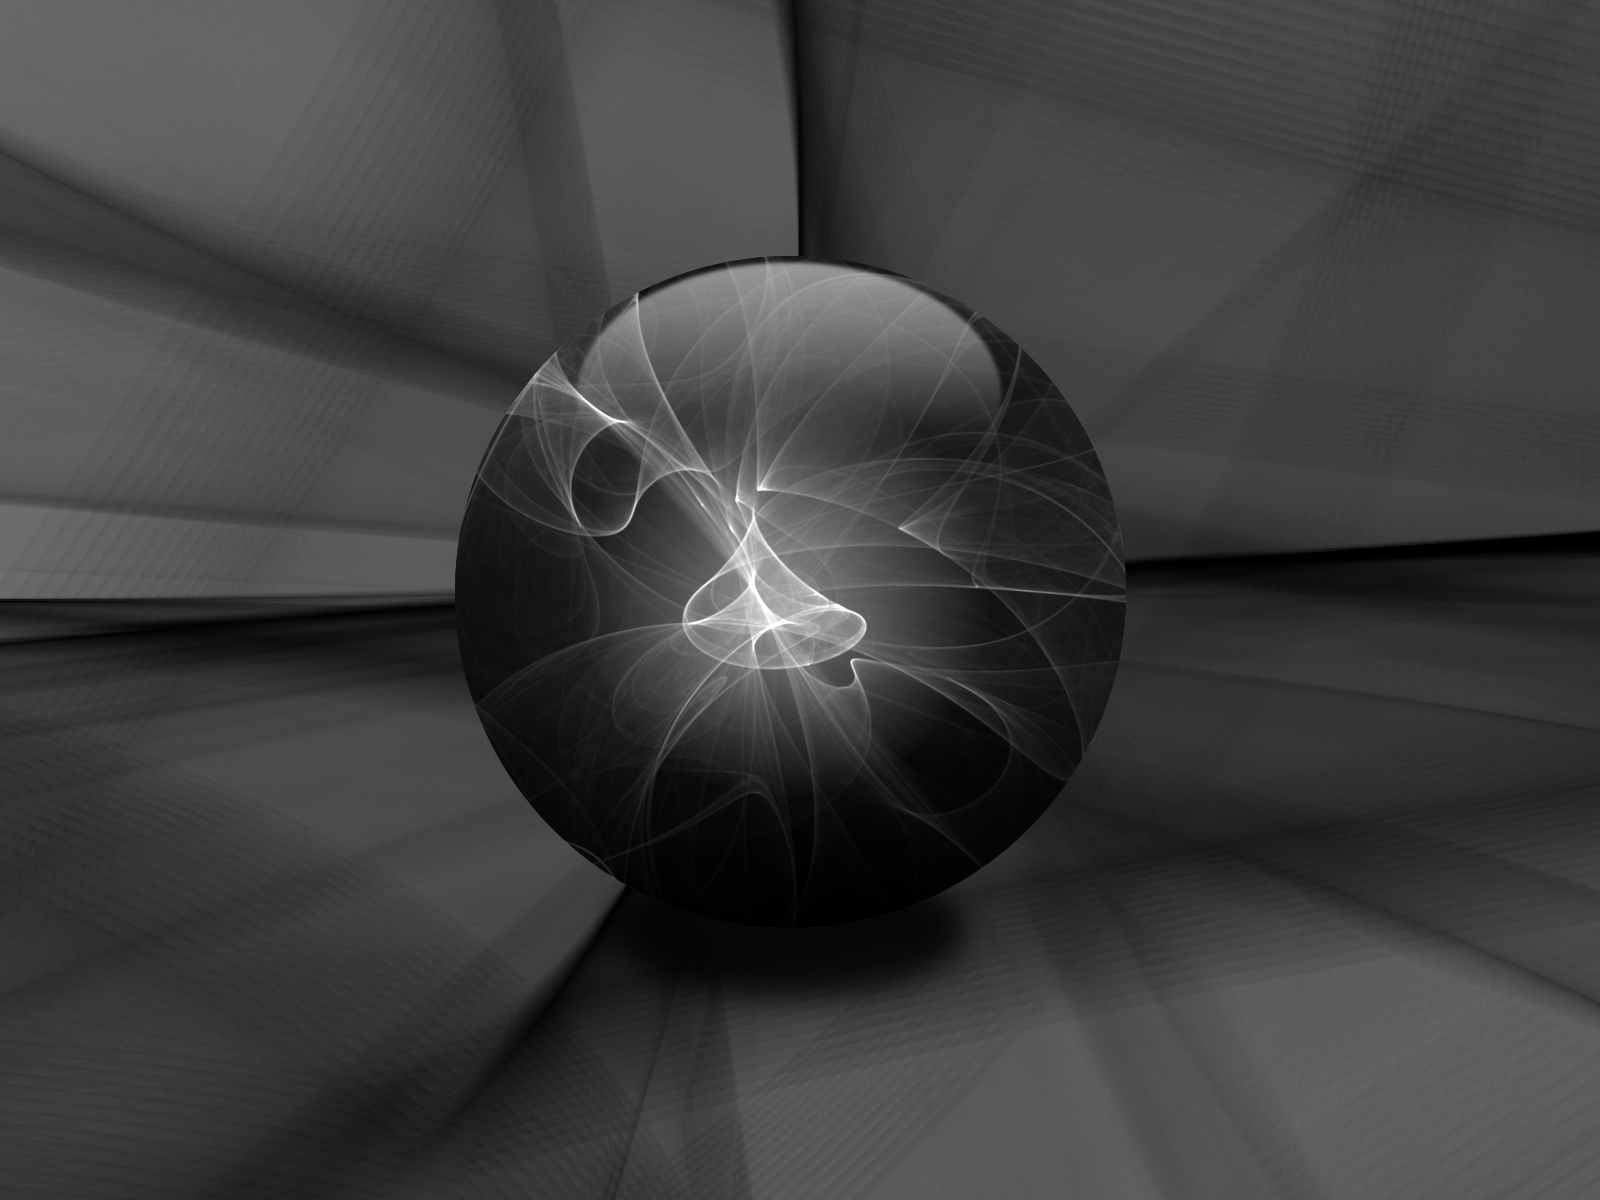 dark, abstract, cgi, ball cell phone wallpapers